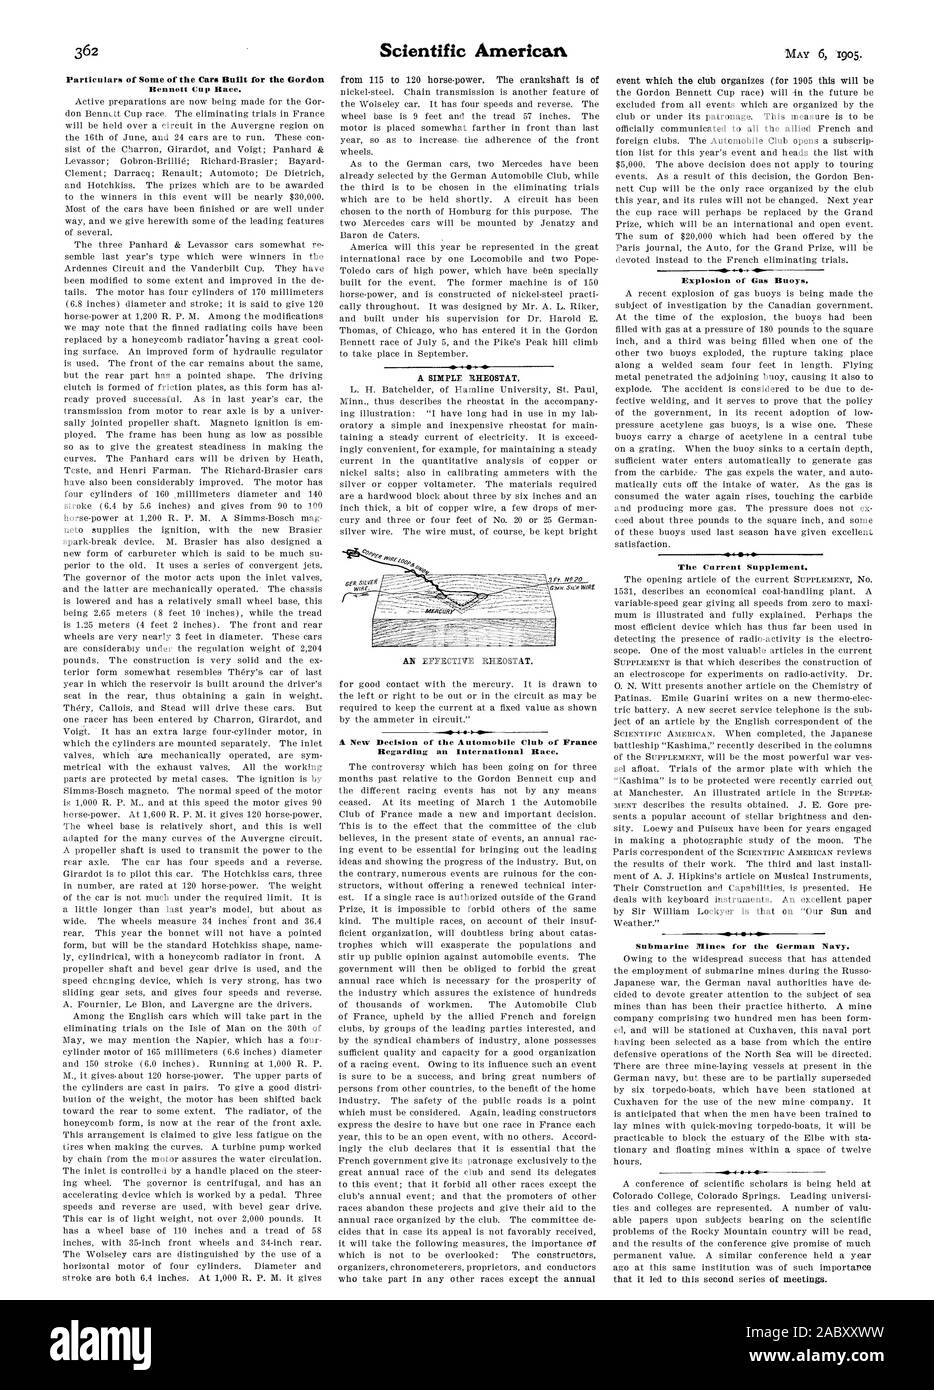 Bennett Cup Race. A New Decision of the Automobile Club of France Regarding an International Race. Explosion of Gas Buoys. The Current Supplement. Submarine Mines for the German Navy., scientific american, 1905-05-06 Stock Photo